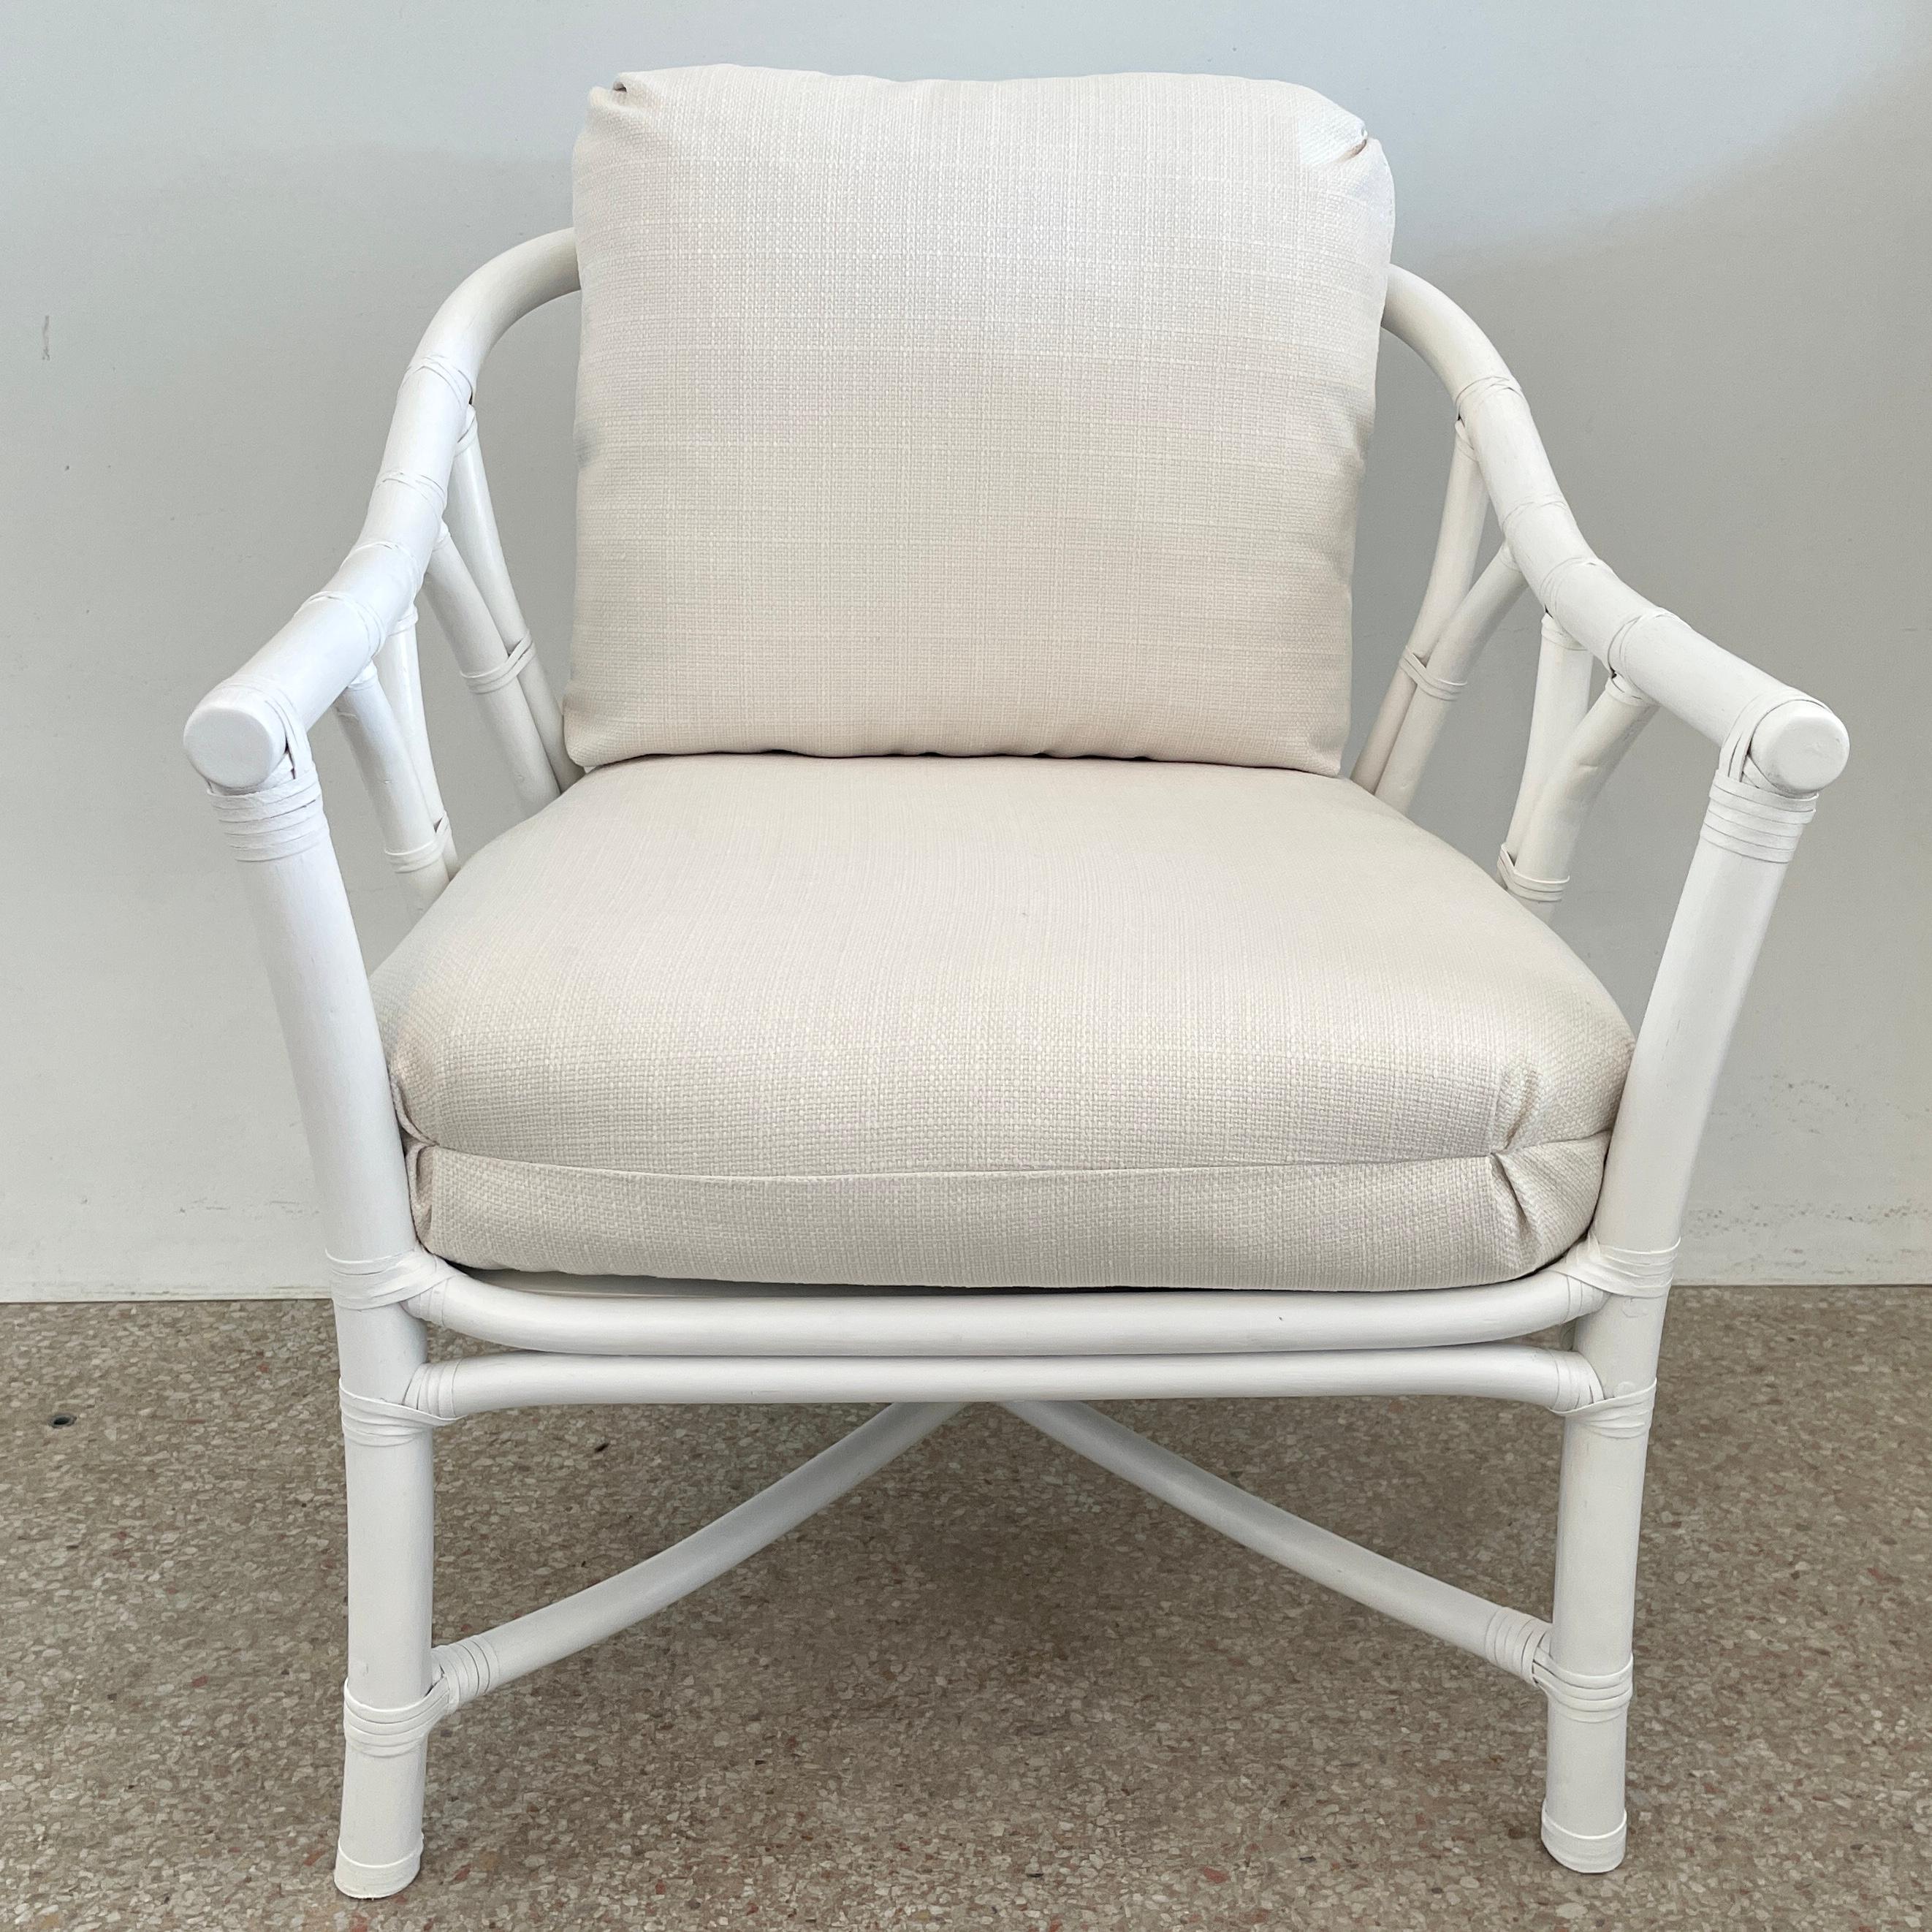 Fabulous Ficks Reed club chair upholstered in new Todd Hase High Performance cushions with frames newly lacquered in white. This piece has an authentic Ficks Reed label. Great addition to your boho chic interiors. We have three club chairs in stock.